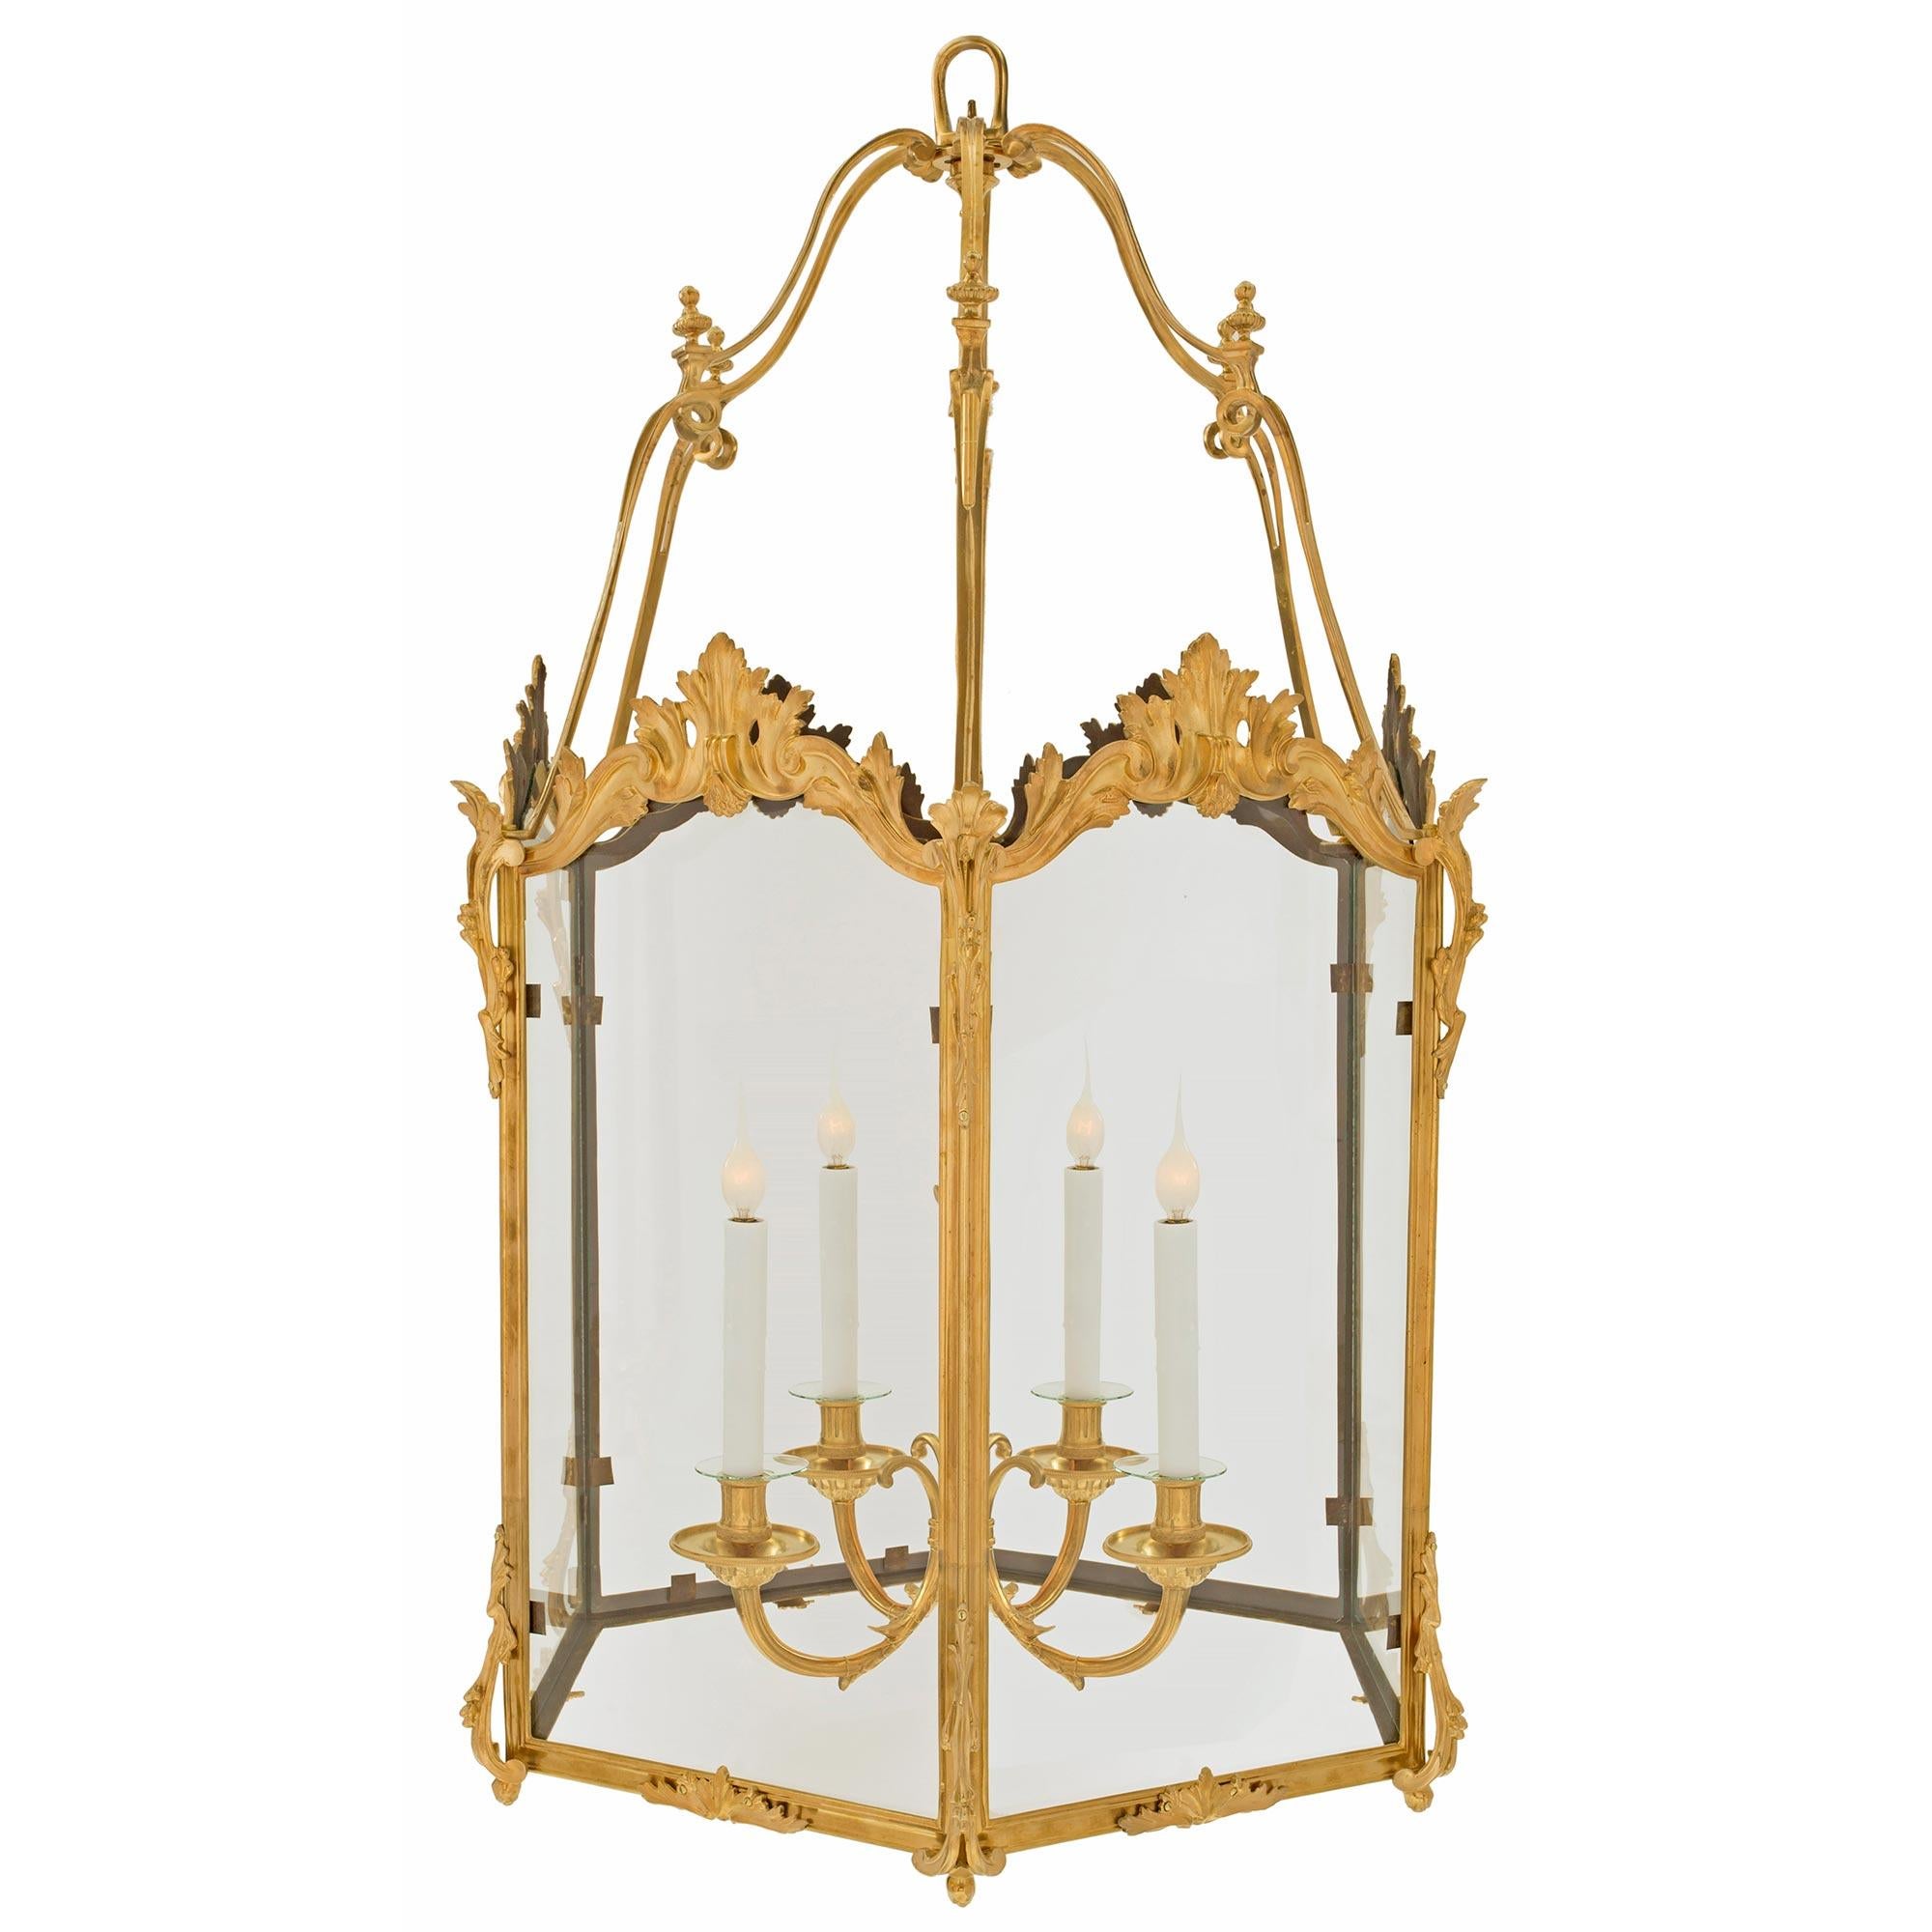 An elegant and large scale French late 19th century Louis XV st. ormolu hexagon lantern. Each fitted glass plate is fitted within an ormolu frame with a mottled design. The panels are embellished with foliate scrolls at each corner while at the